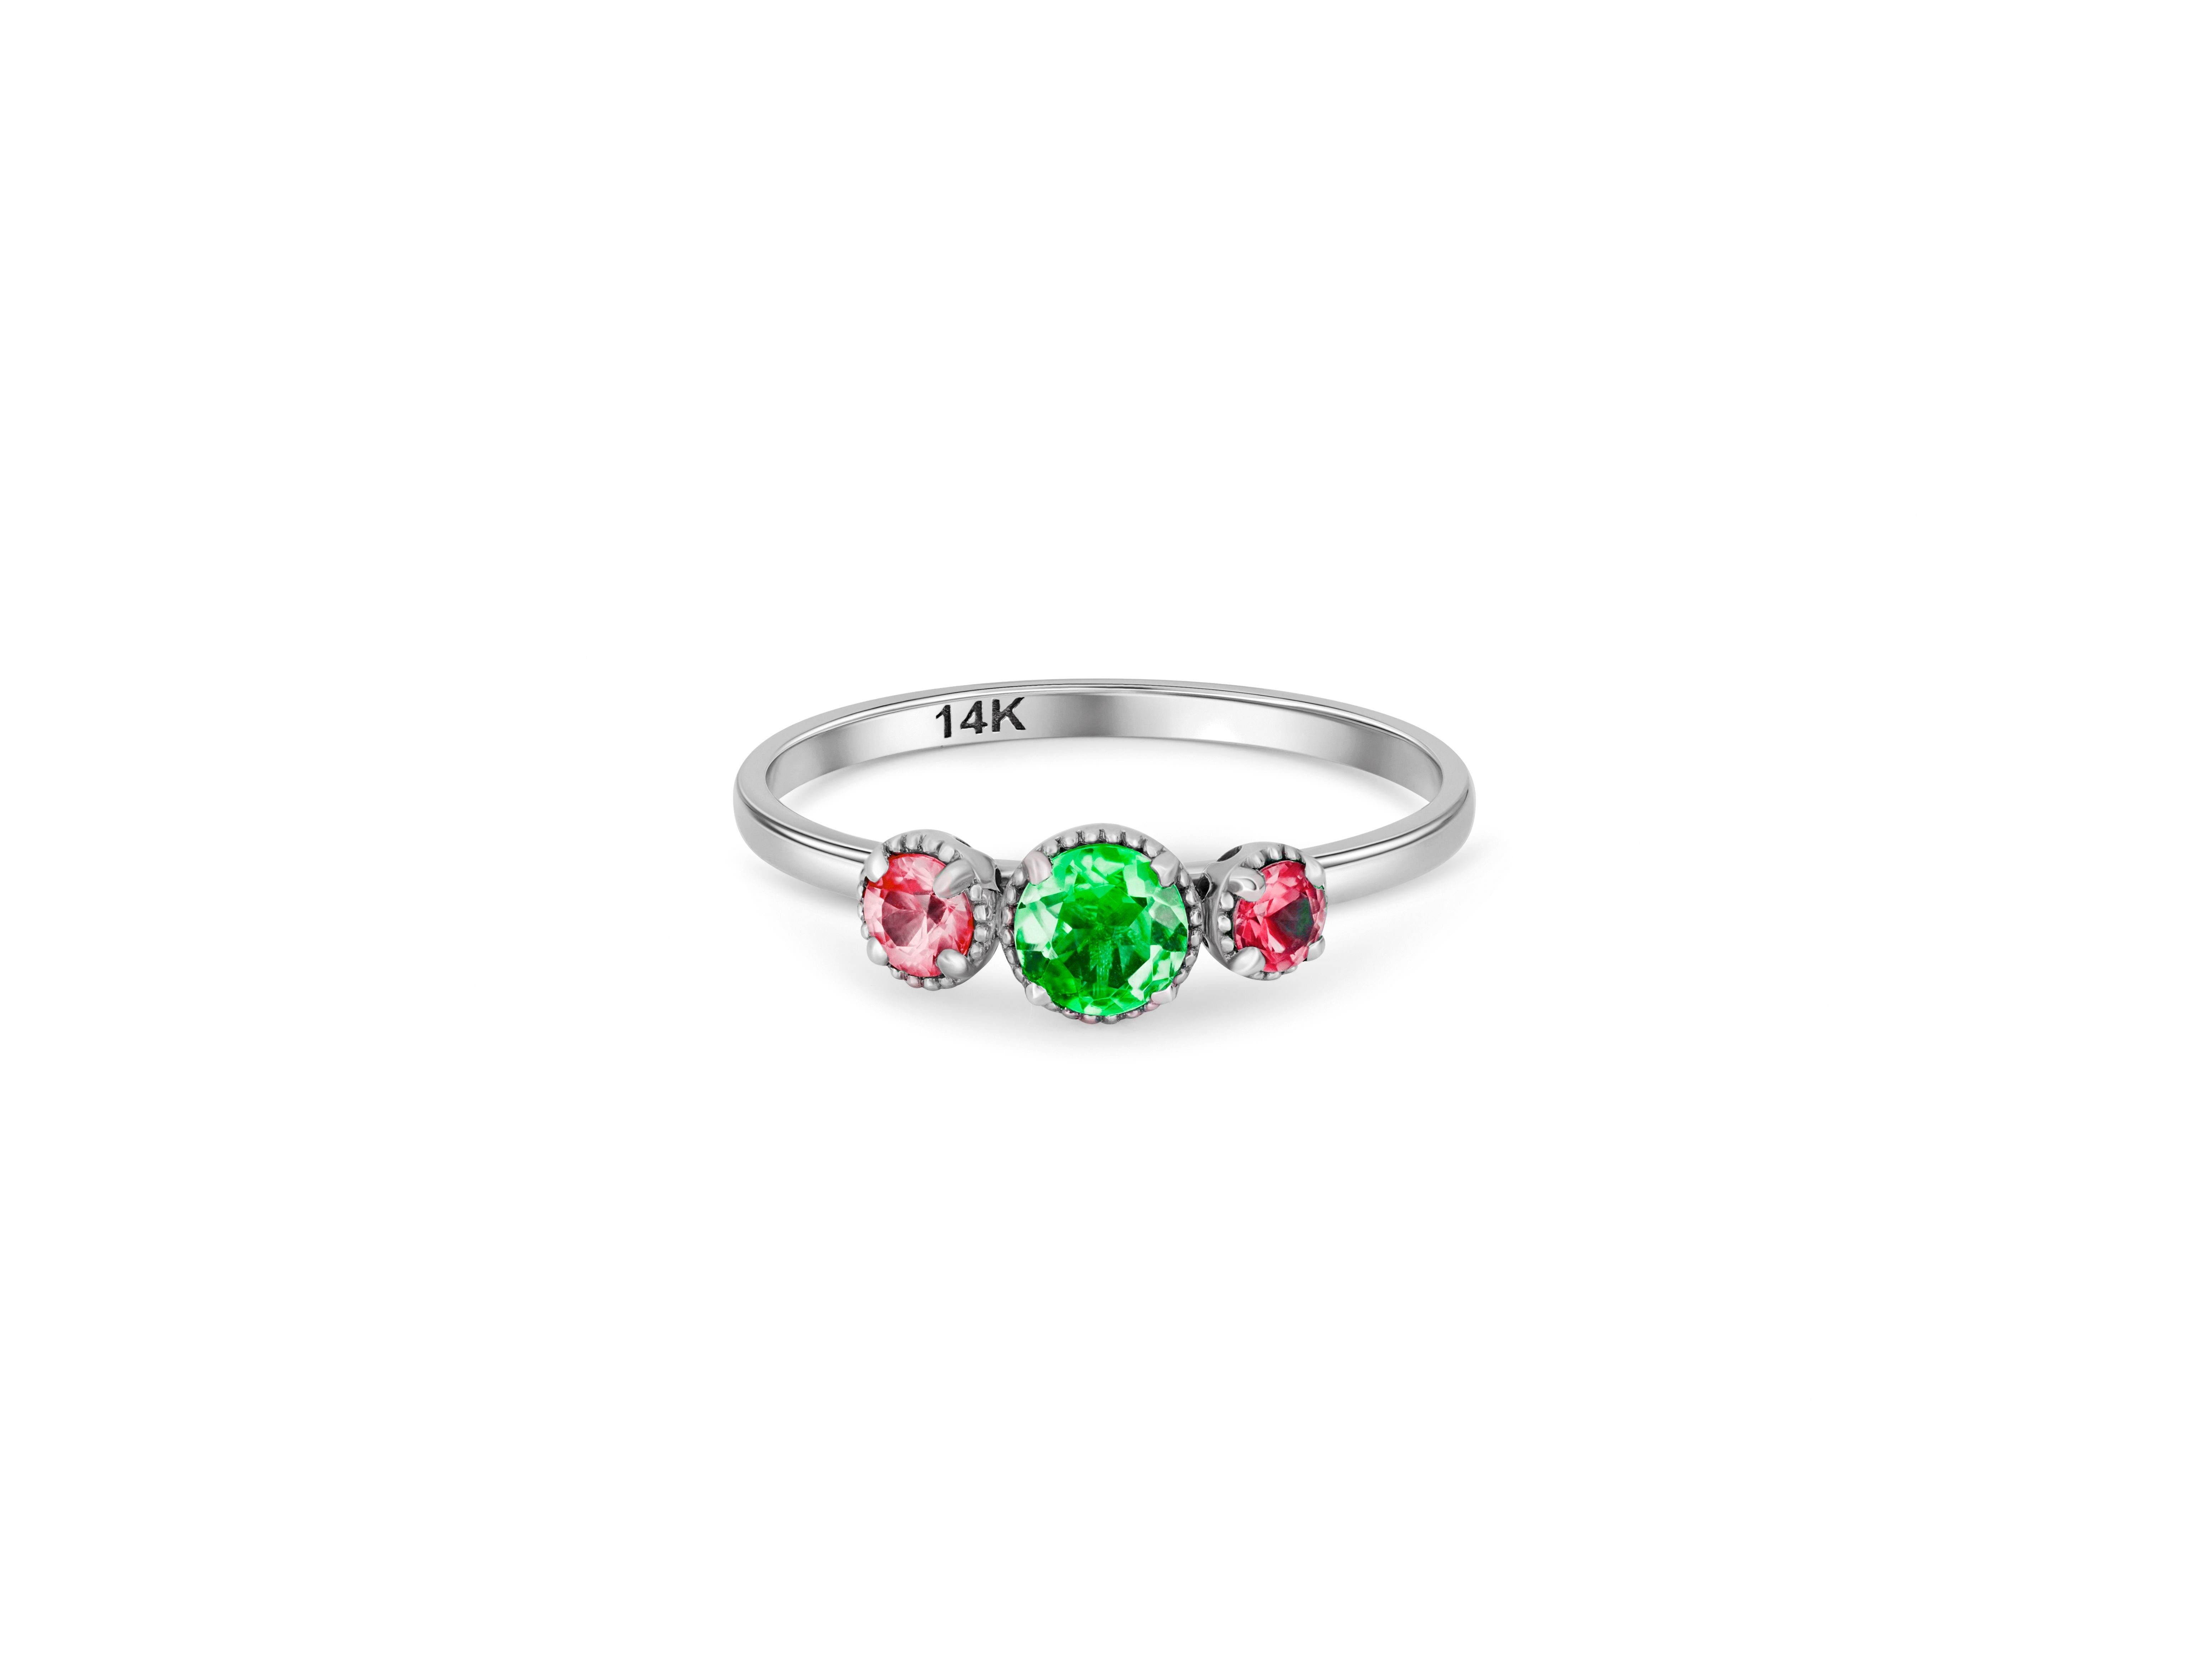 Trio gems 14k gold ring.
3 gemstone palette 14k gold ring.  Ruby and emerald 14k gold ring.  Color contrast gold ring. Rink and green gemstone ring. 

Metal: 14k gold
Weight: 1.8 gr depends from size

Gemstones:
Green: lab emerald, round cut
Pink: